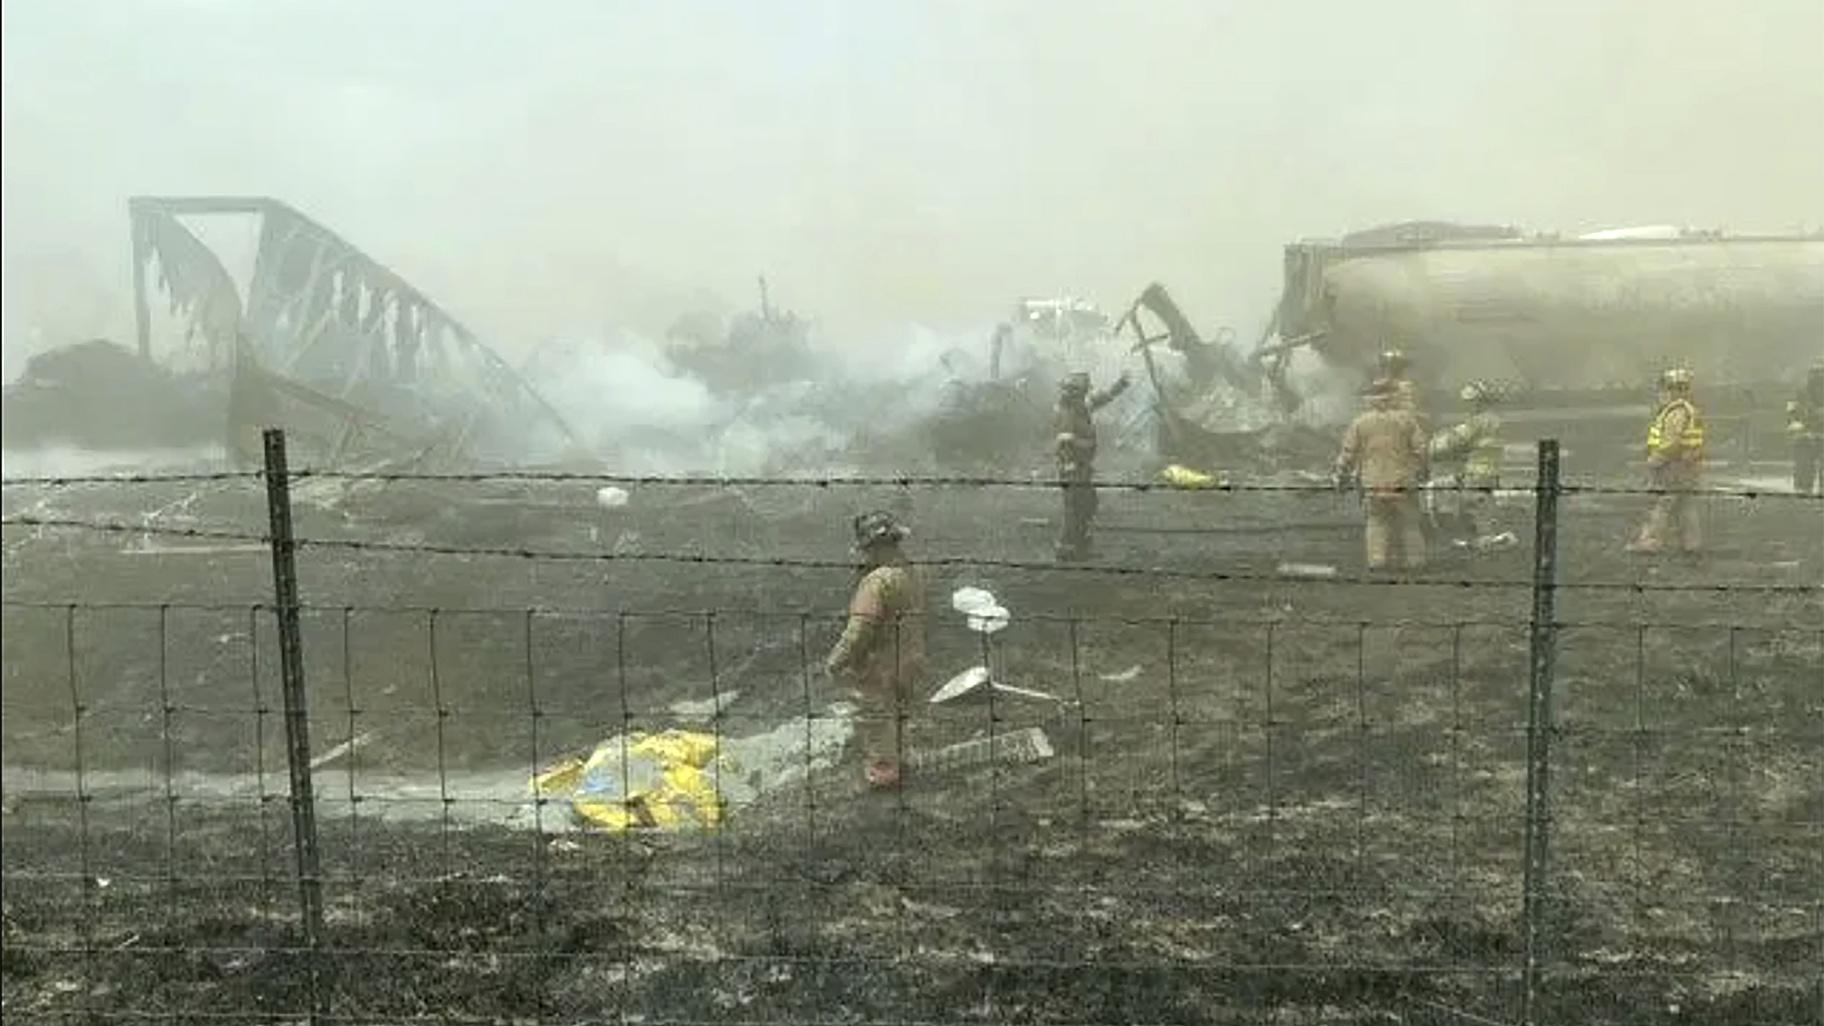 First responders work the scene of a crash involving at least 20 vehicles that shut down a highway in Illinois, Monday, May 1, 2023. Illinois State Police say a windstorm that kicked up clouds of dust in south-central Illinois has led to numerous crashes and multiple fatalities on Interstate 55. (WICS TV via AP)